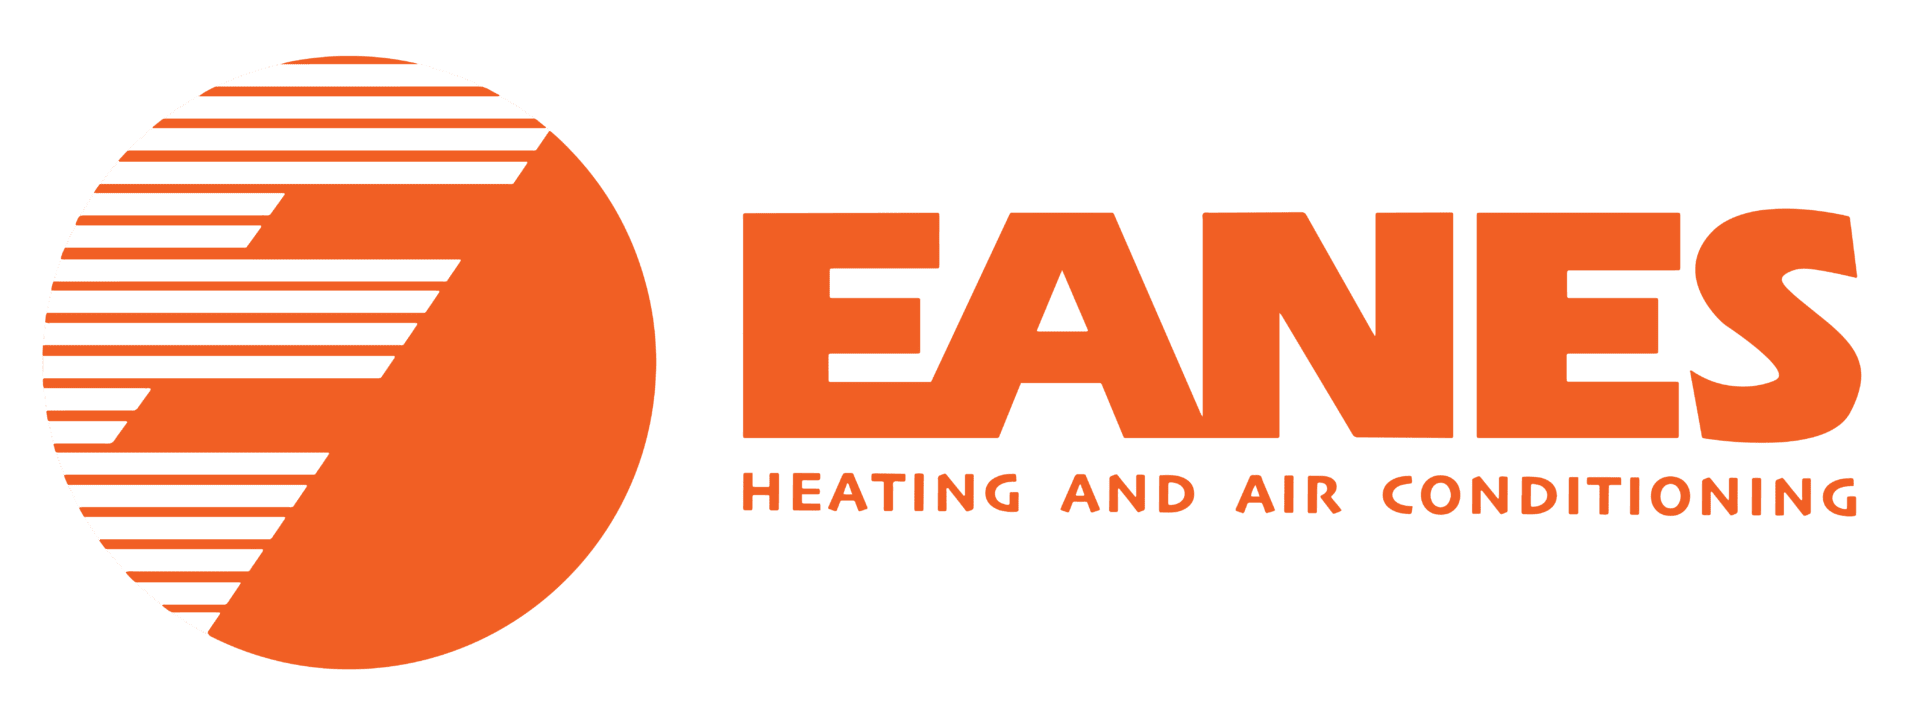 GET UP TO $1900 OFF A NEW COOLING AND HEATING SYSTEM | Eanes Heating & Air